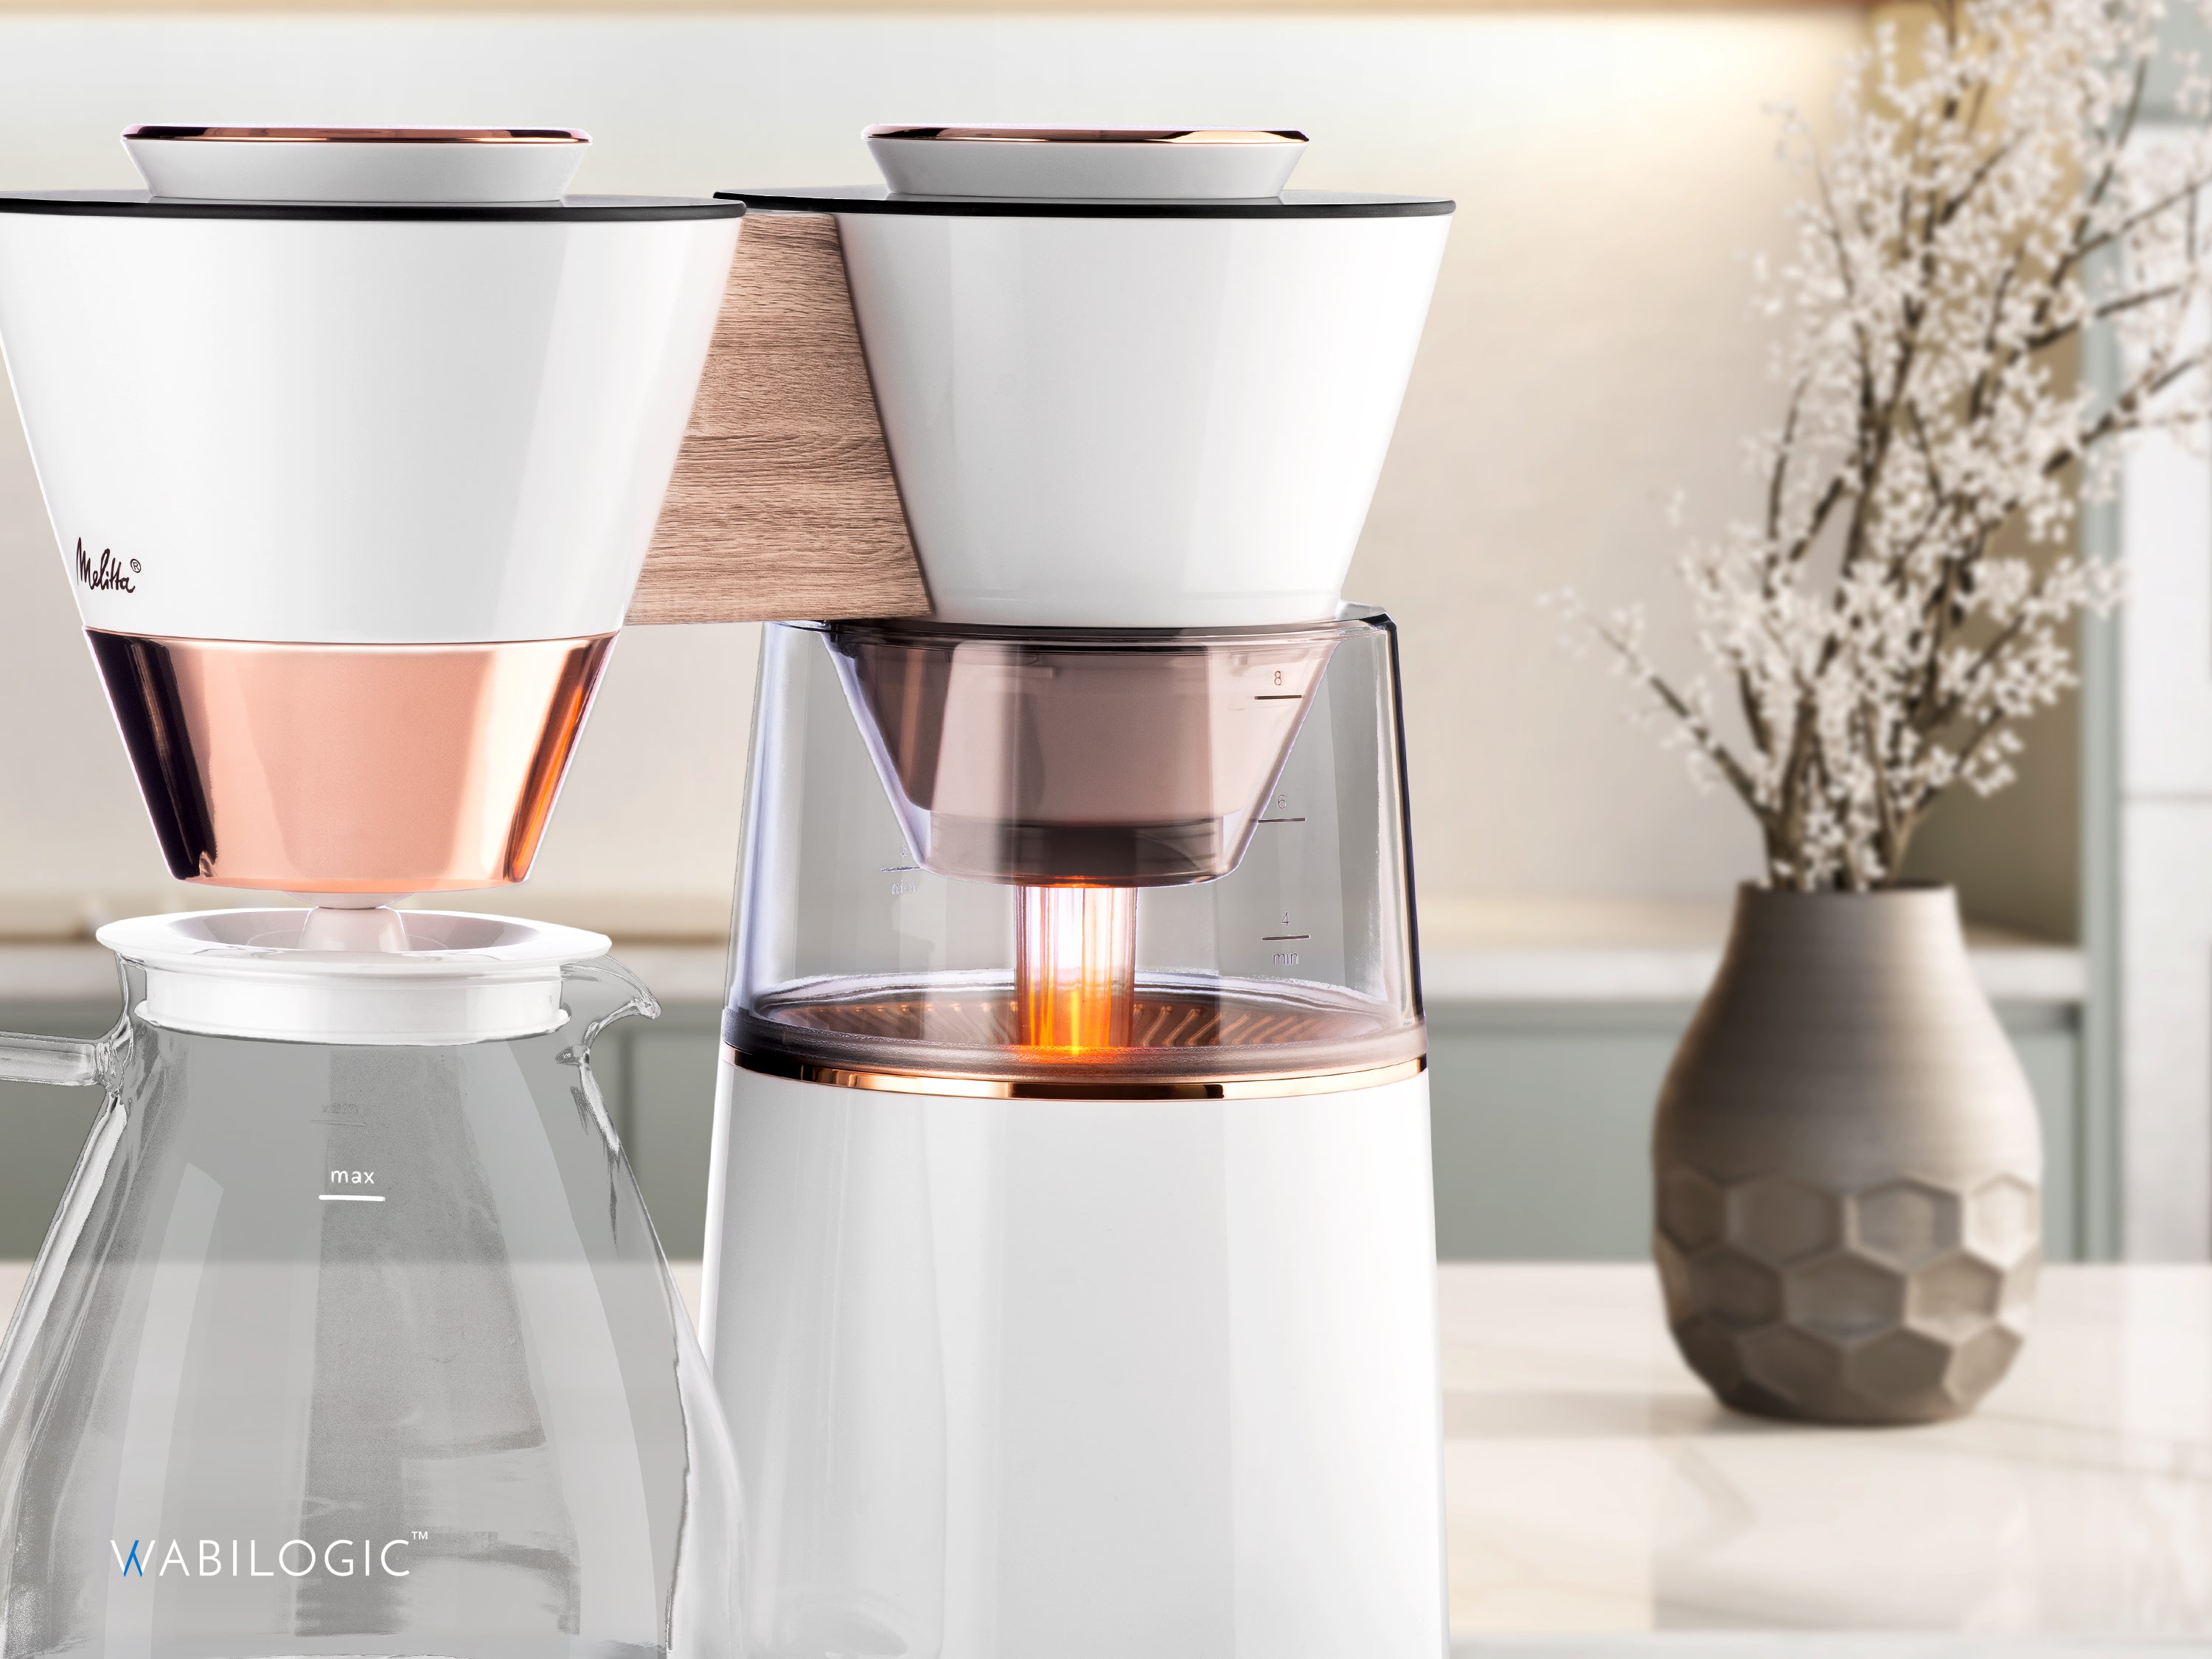 Melitta® - Shop Better Coffee, Filters, Pour-Overs & More – Melitta USA